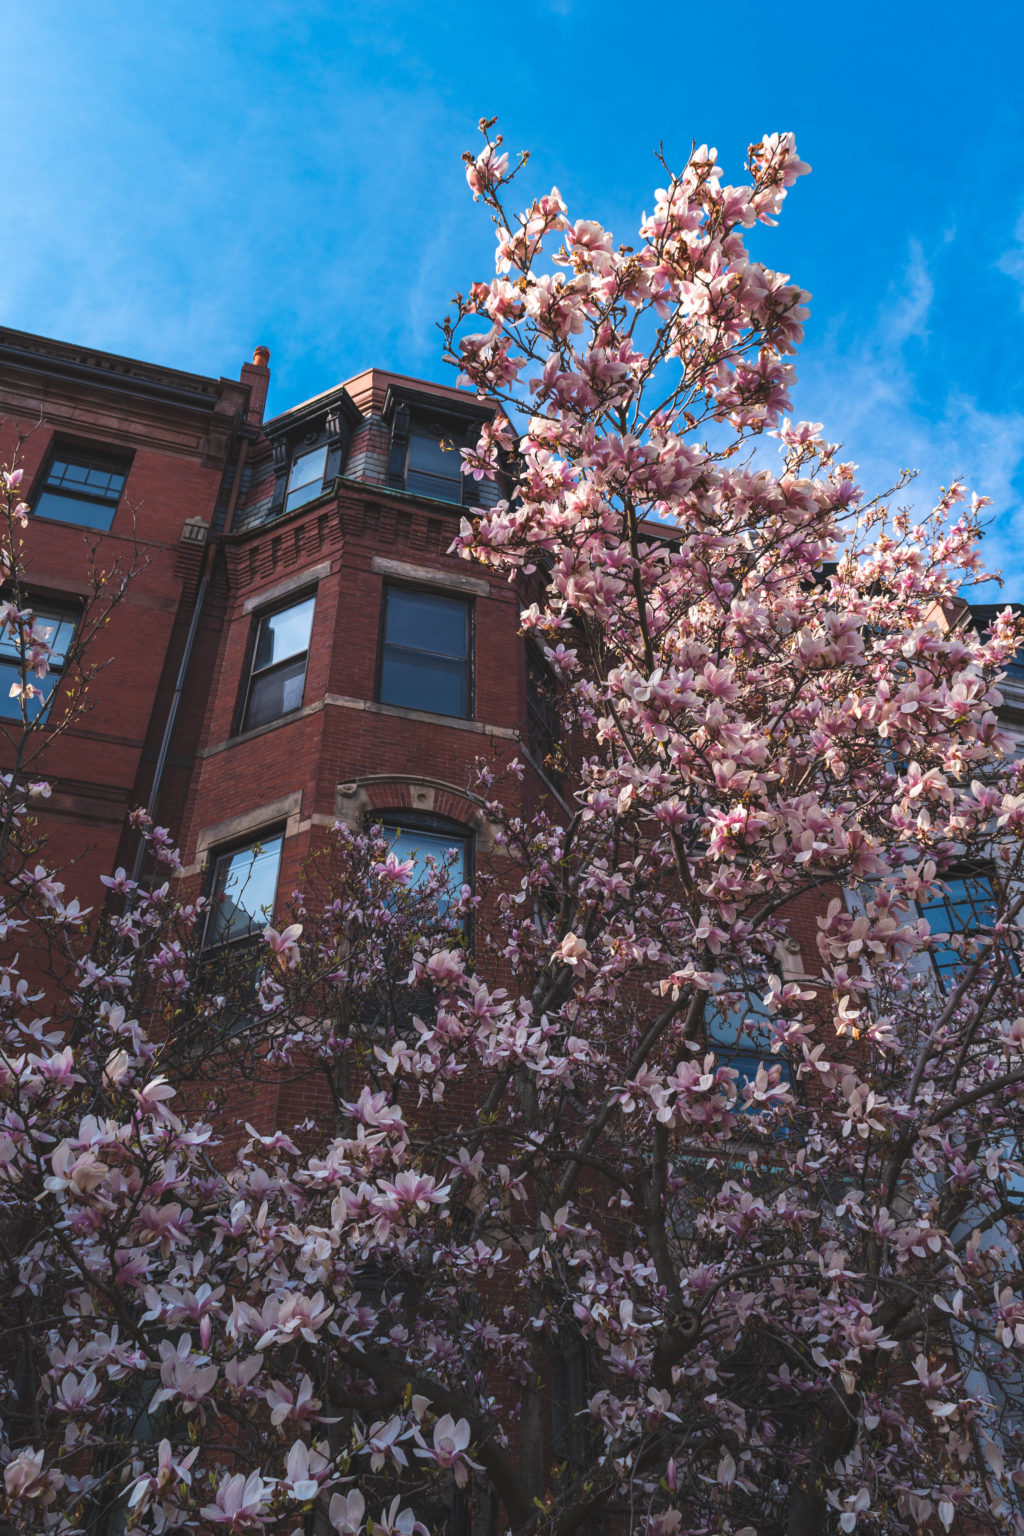 Spring in Boston - The Wicked Weekend